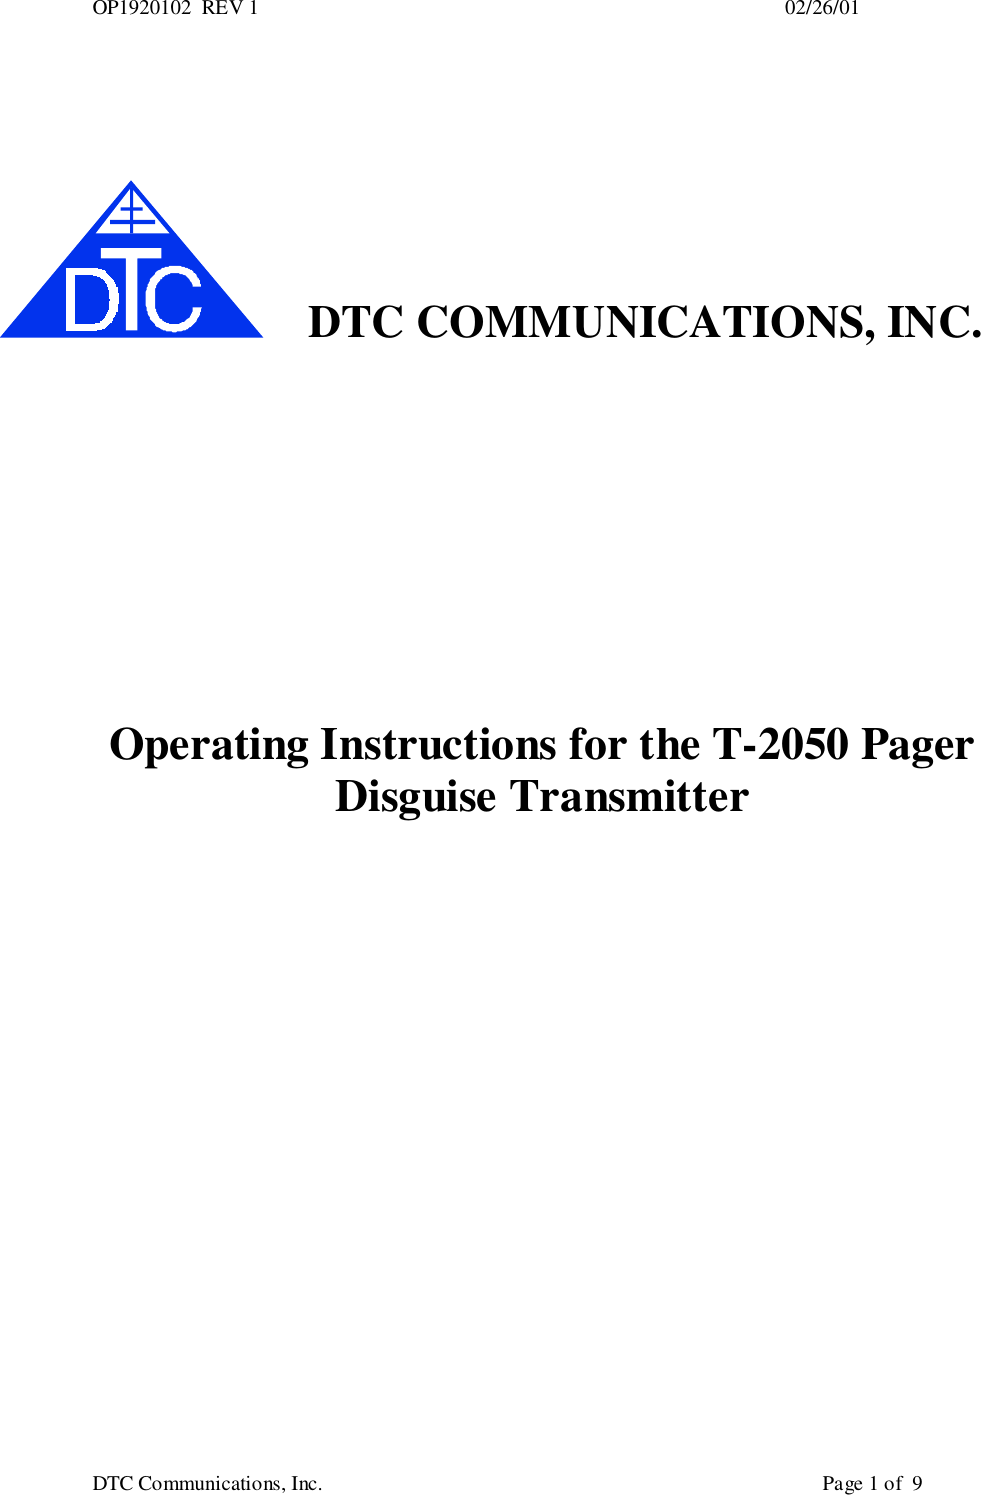 OP1920102  REV 1                                                                                                     02/26/01DTC Communications, Inc.                                                                                                Page 1 of  9DTC COMMUNICATIONS, INC.Operating Instructions for the T-2050 PagerDisguise Transmitter